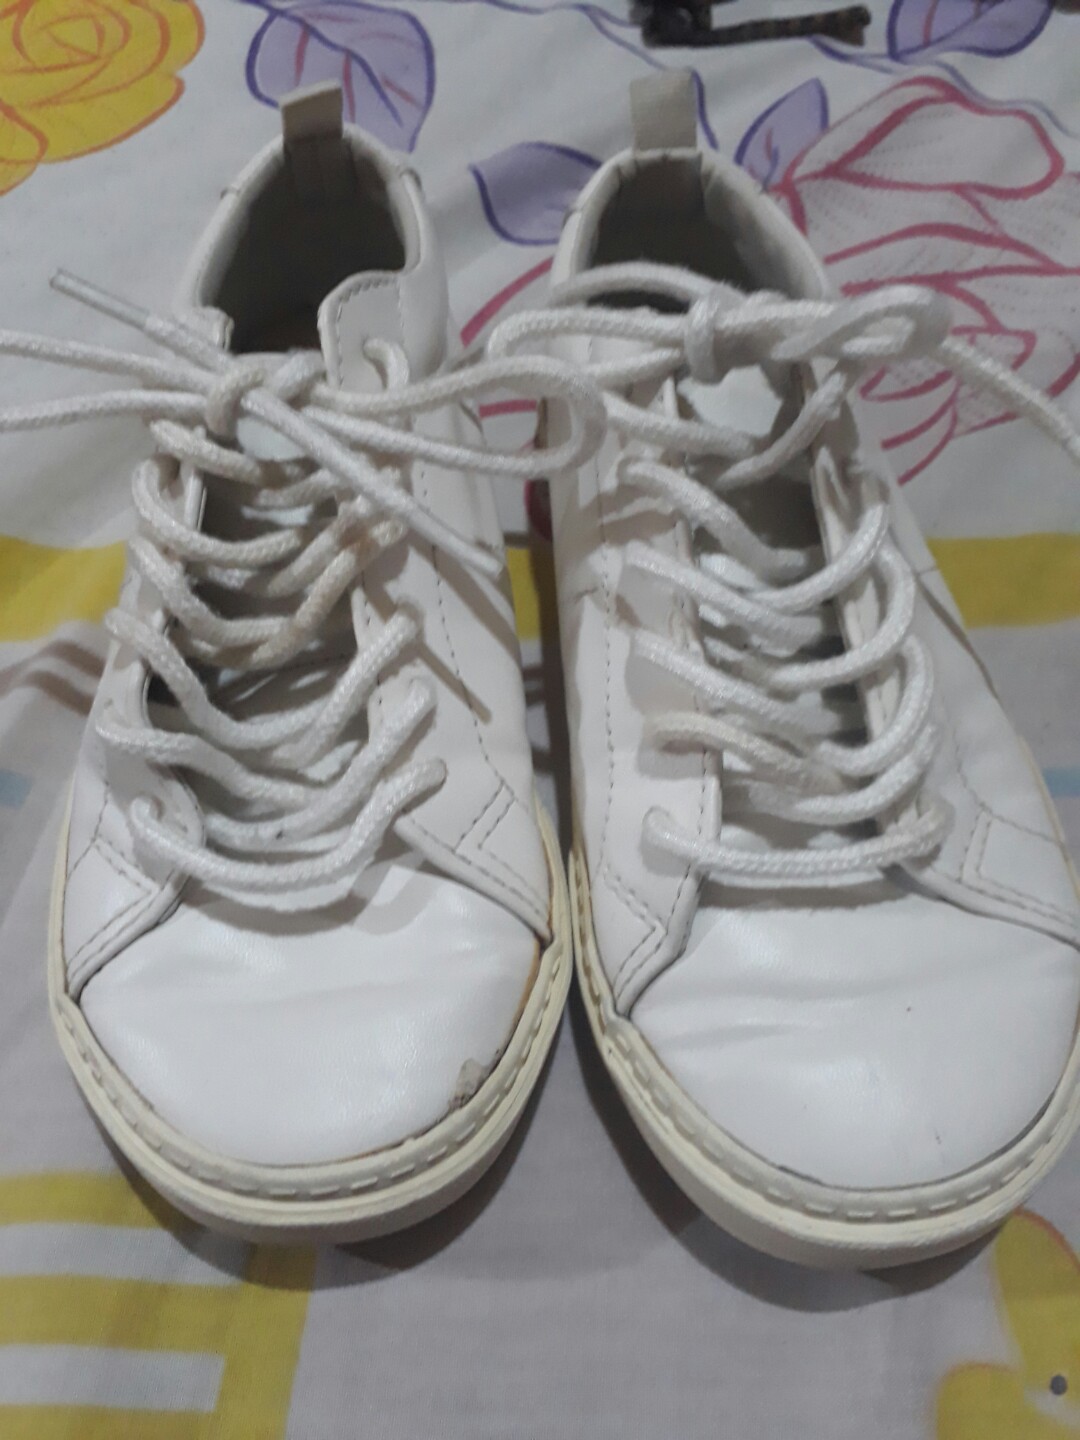 gap white leather sneakers